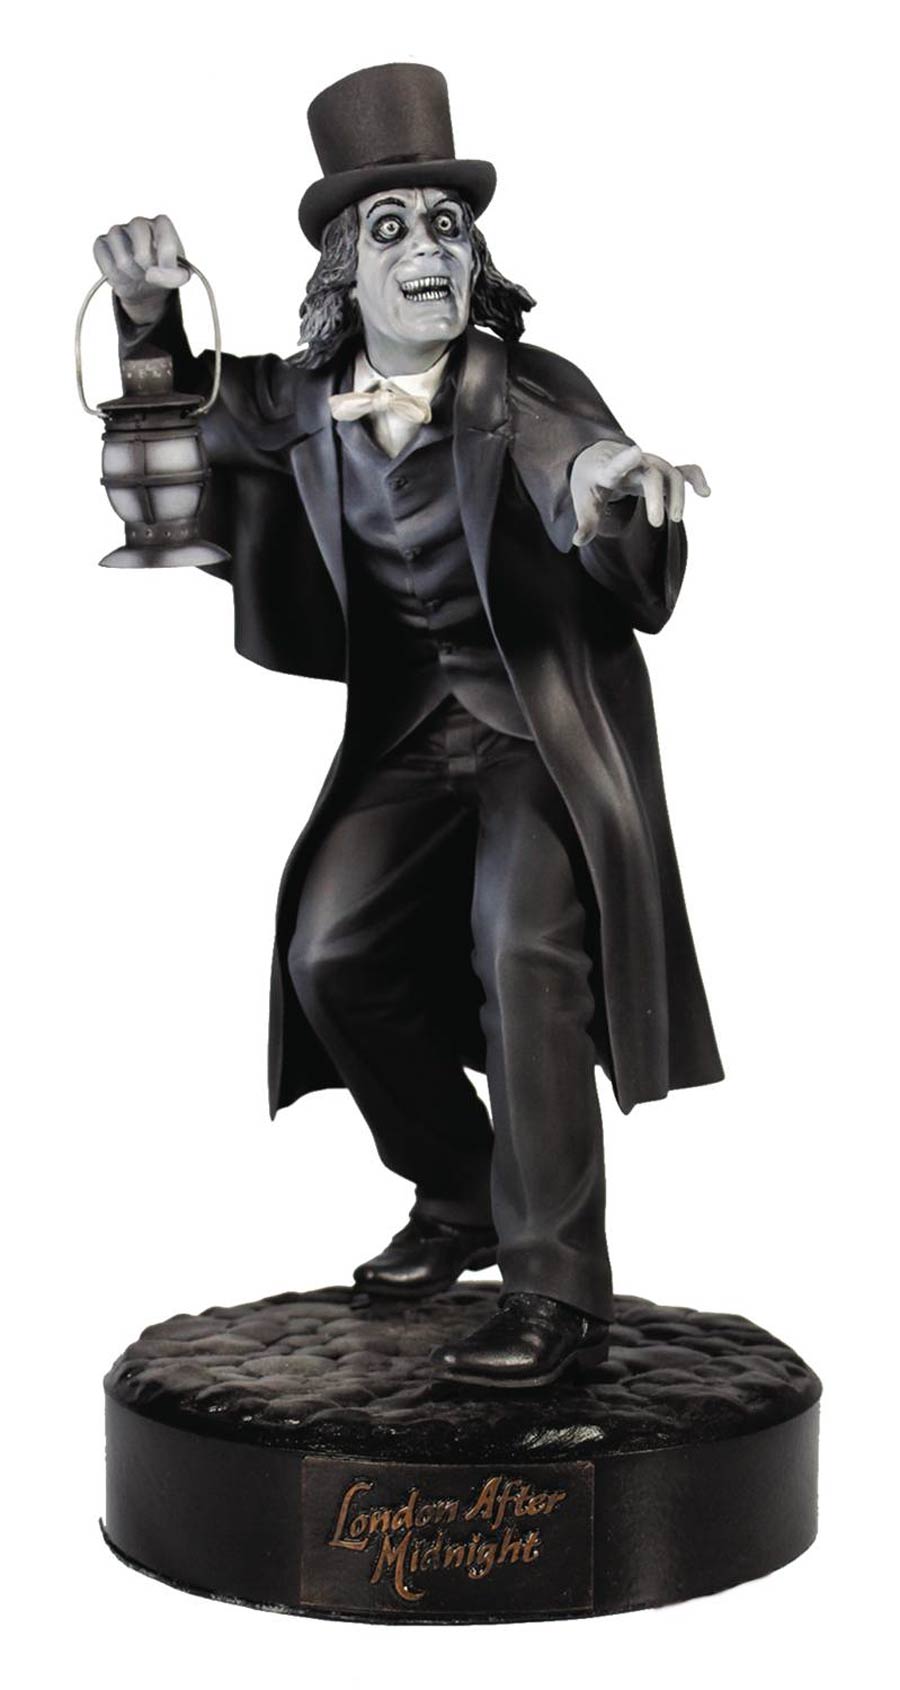 London After Midnight 1/6 Scale Resin Statue